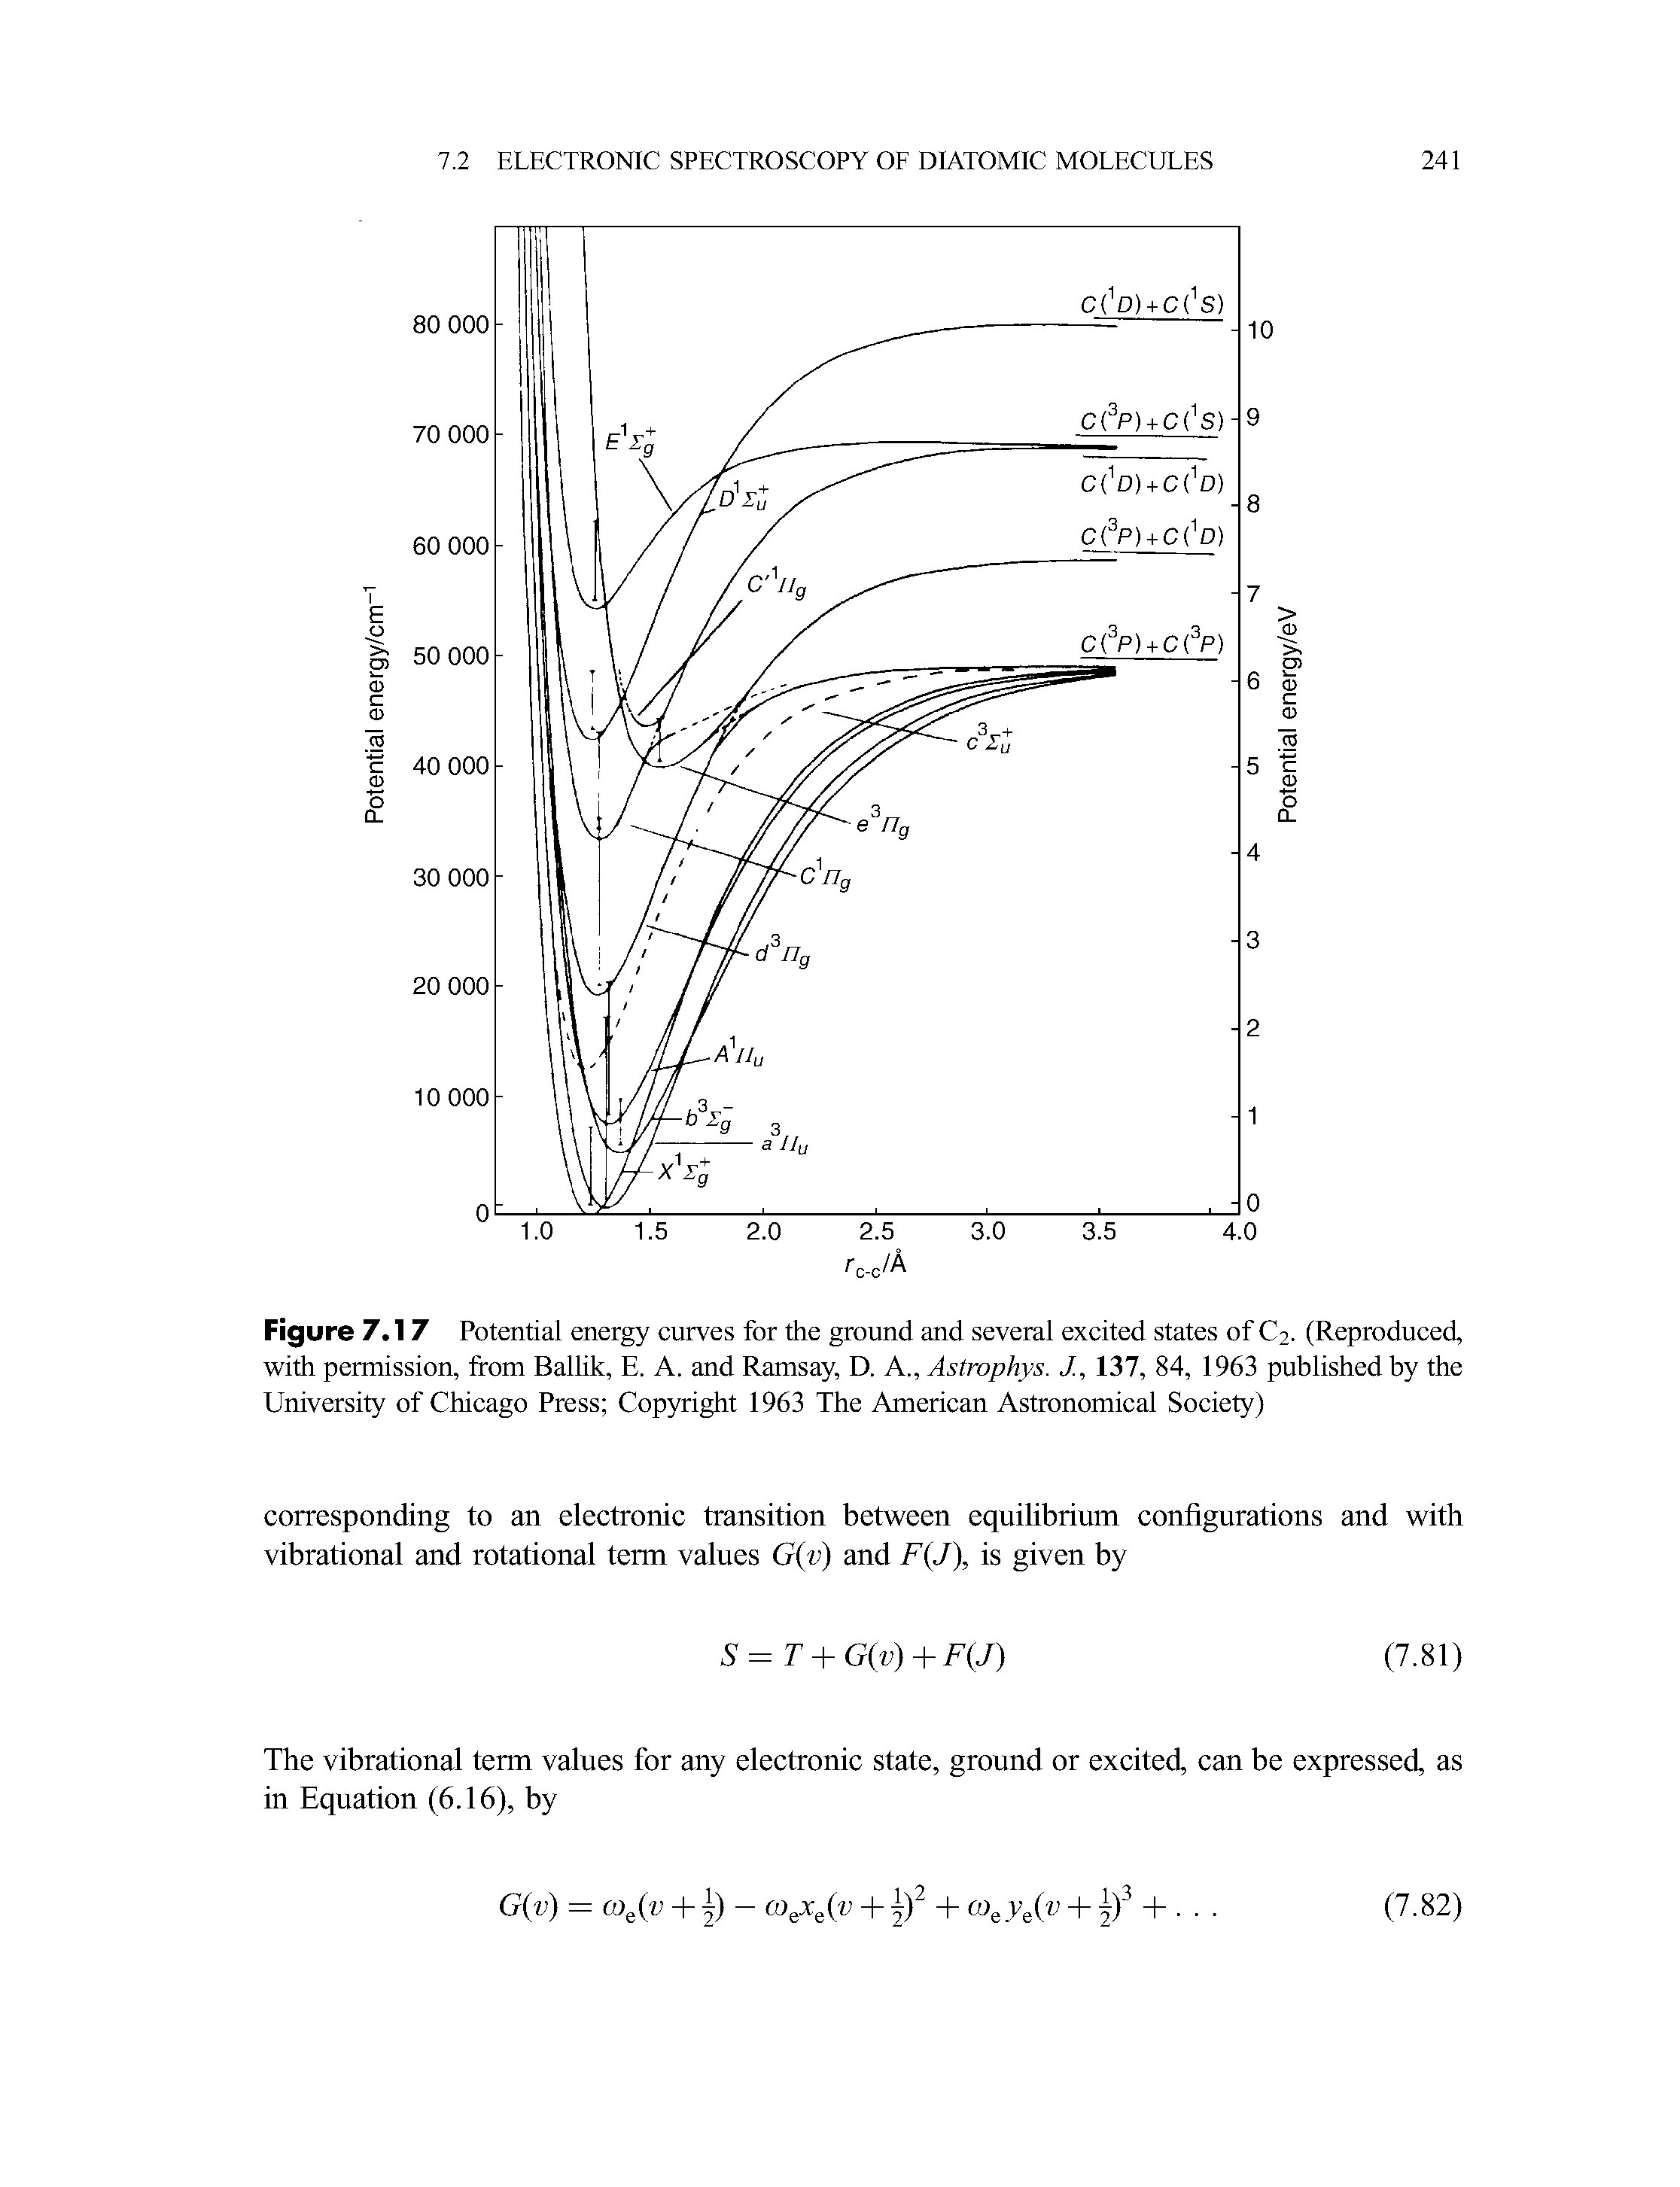 Figure 7.1 7 Potential energy curves for the ground and several excited states of C2. (Reproduced, with permission, from Ballik, E. A. and Ramsay, D. A., Astrophys. J., 137, 84, 1963 published by the University of Chicago Press Copyright 1963 The American Astronomical Society)...